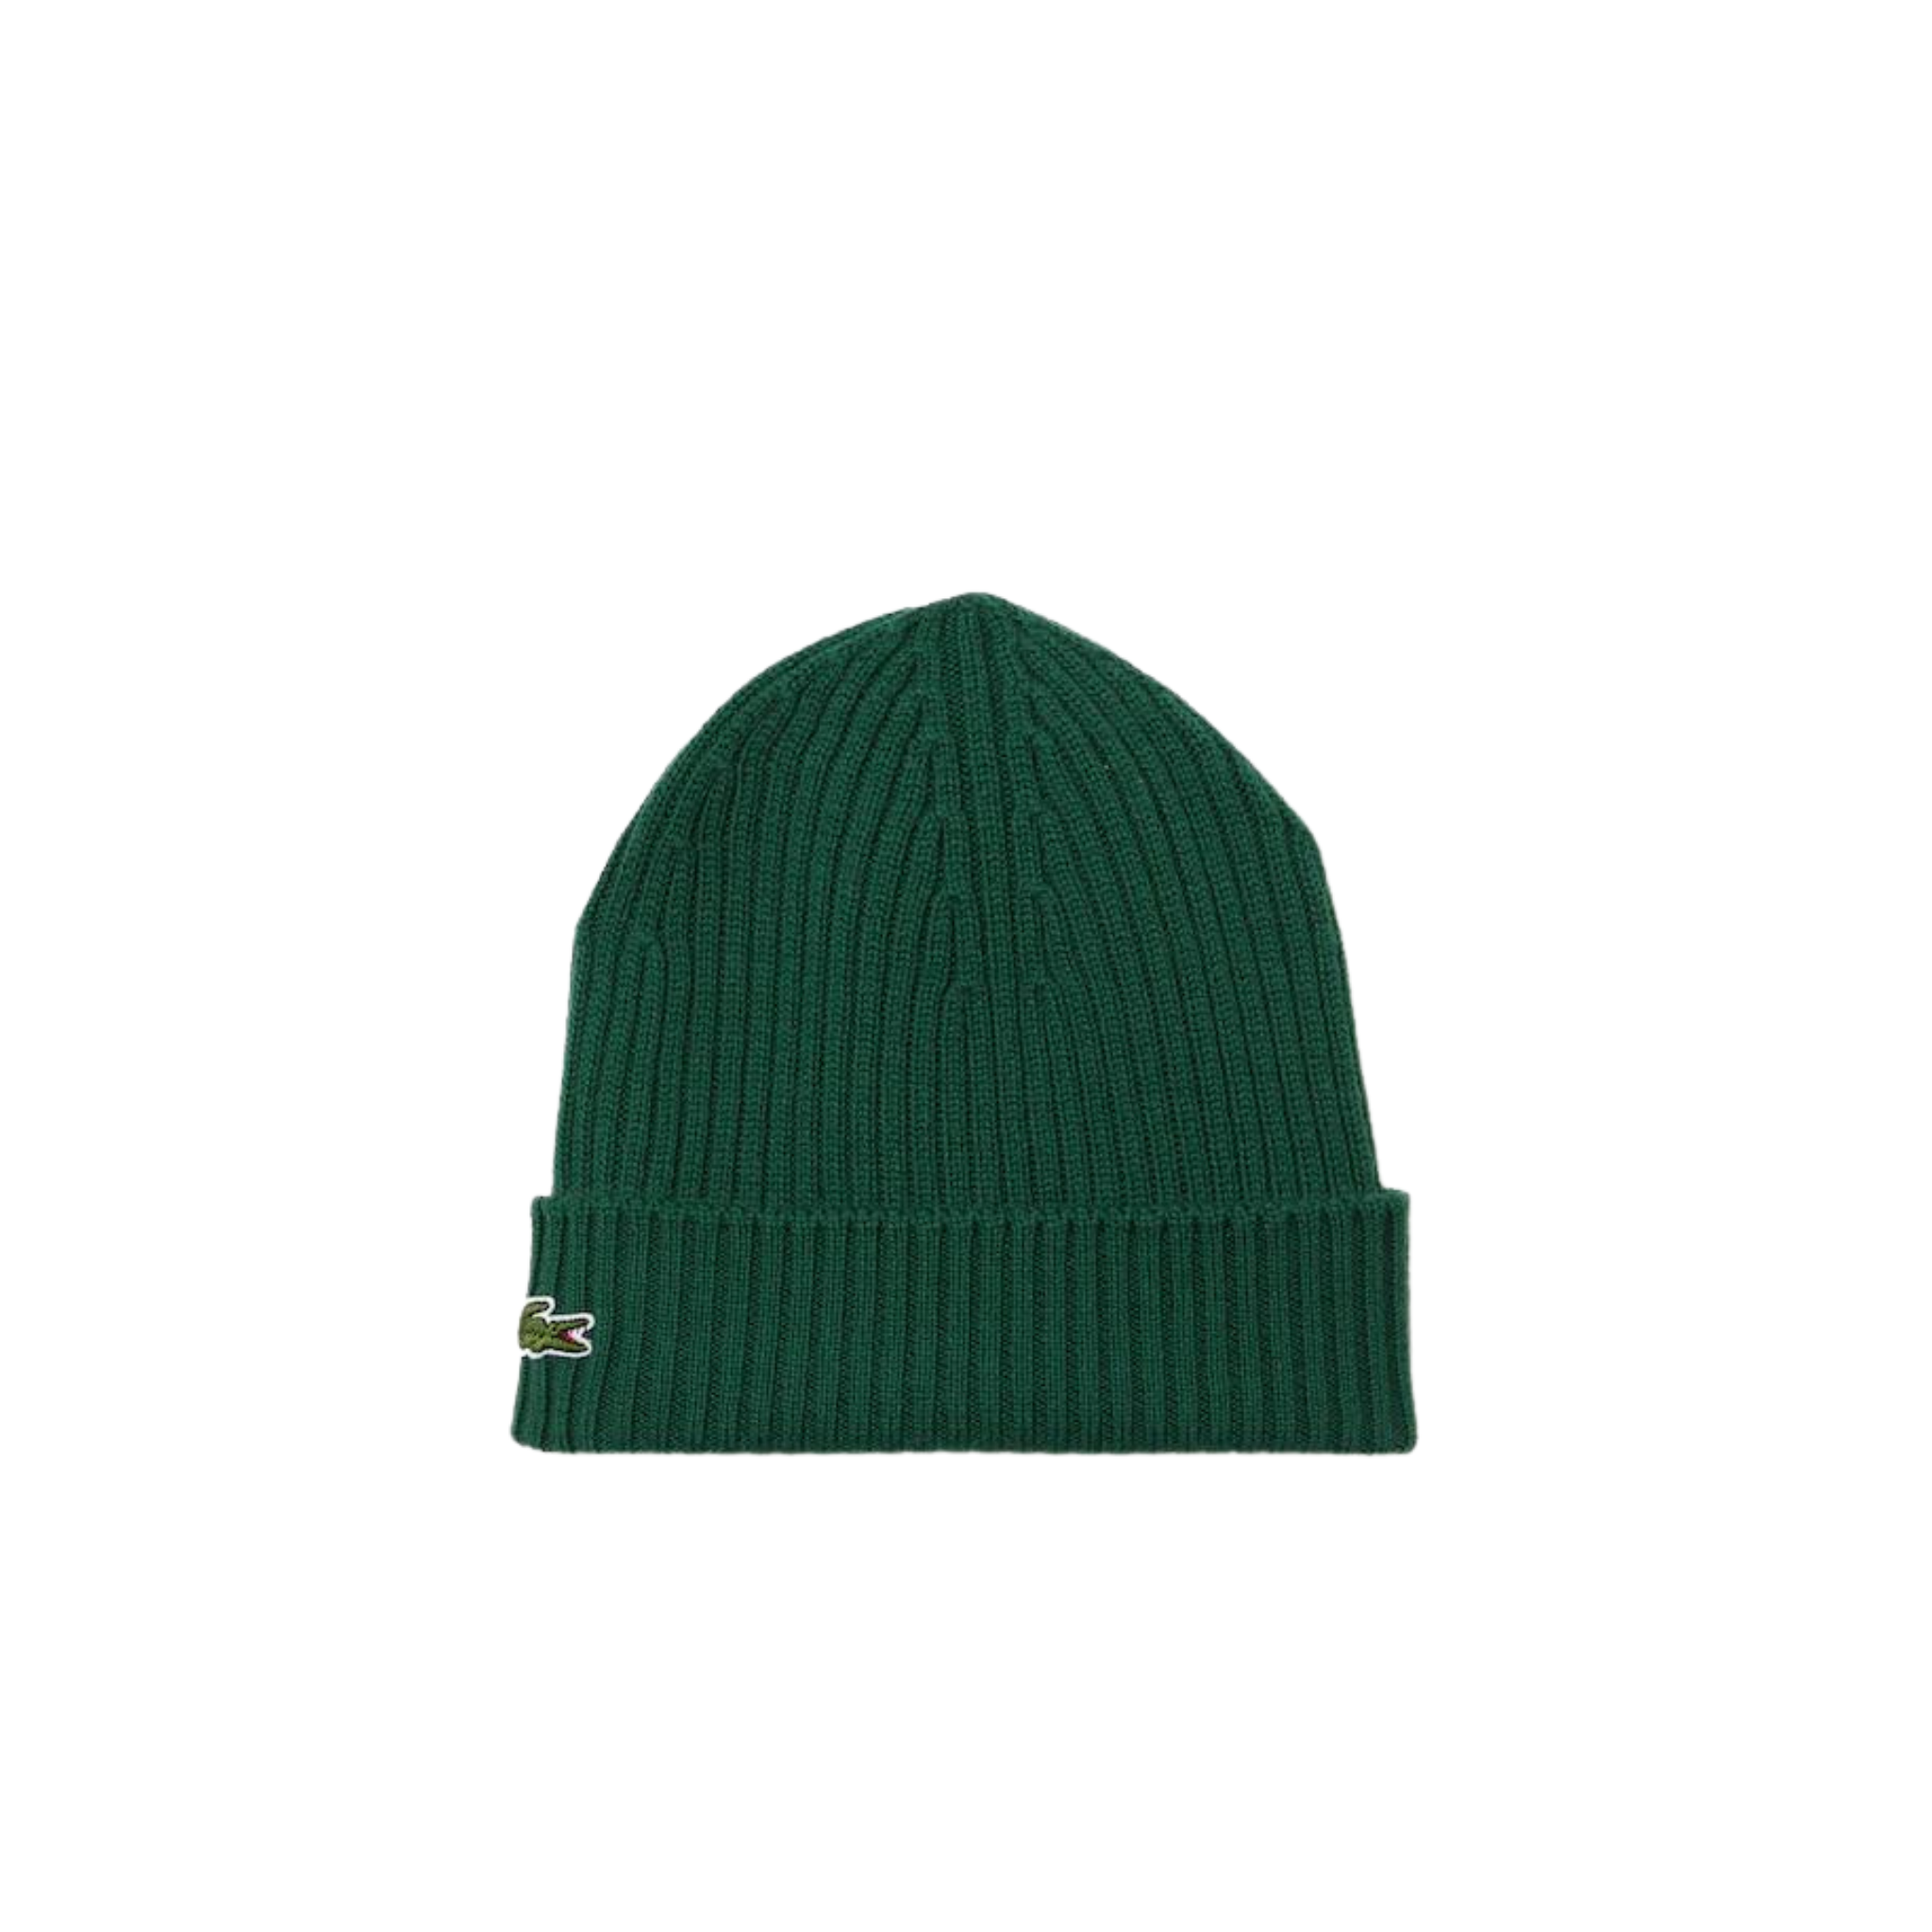 Lacoste Unisex Ribbed Wool Beanie (Green) - Lacoste